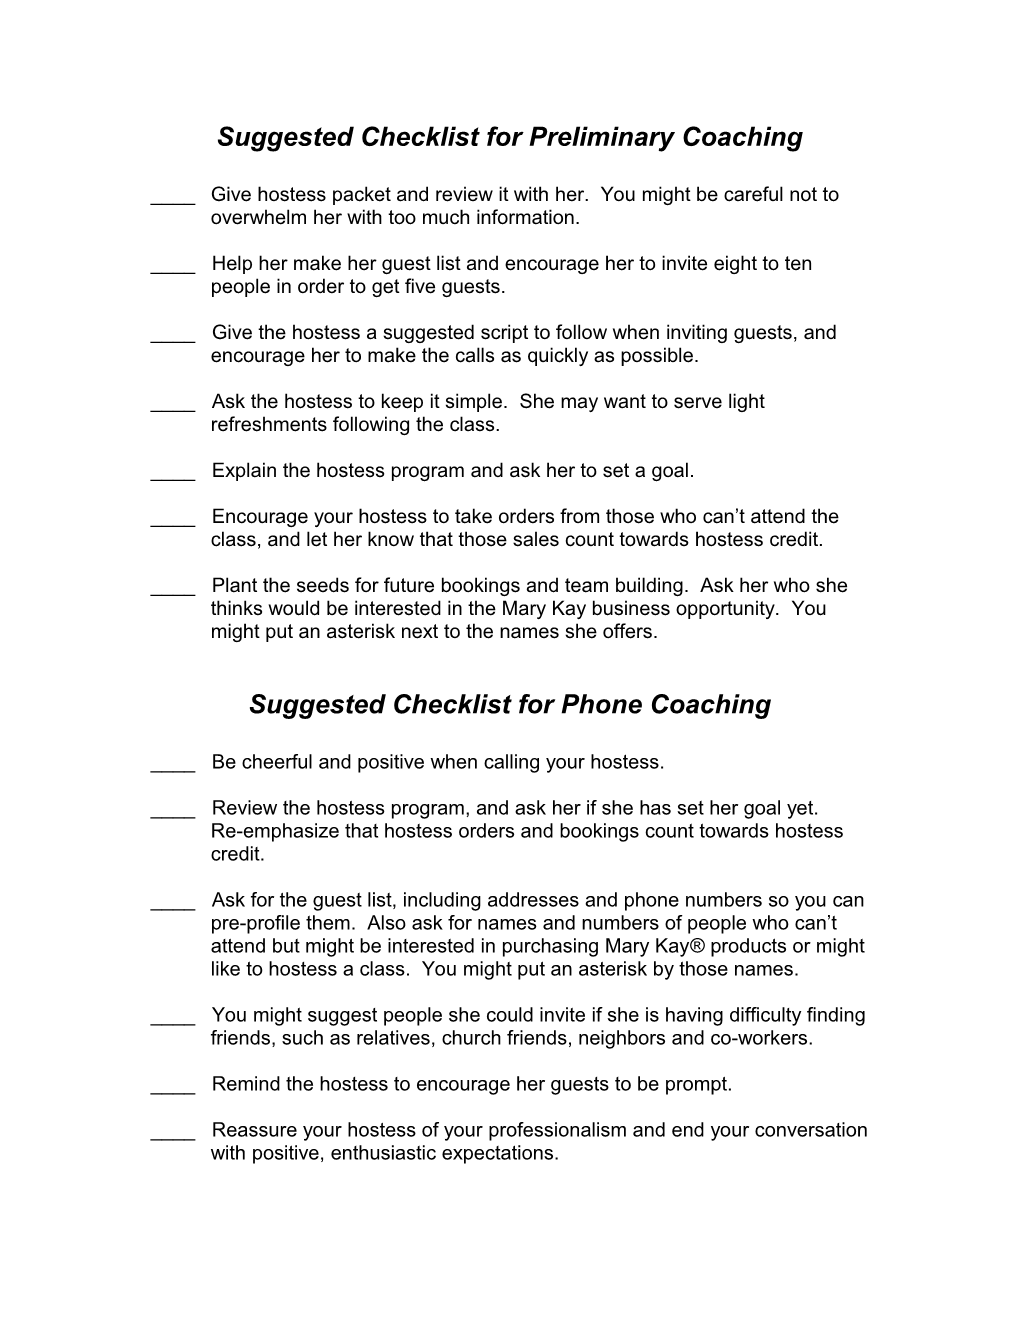 Suggested Checklist for Preliminary Coaching